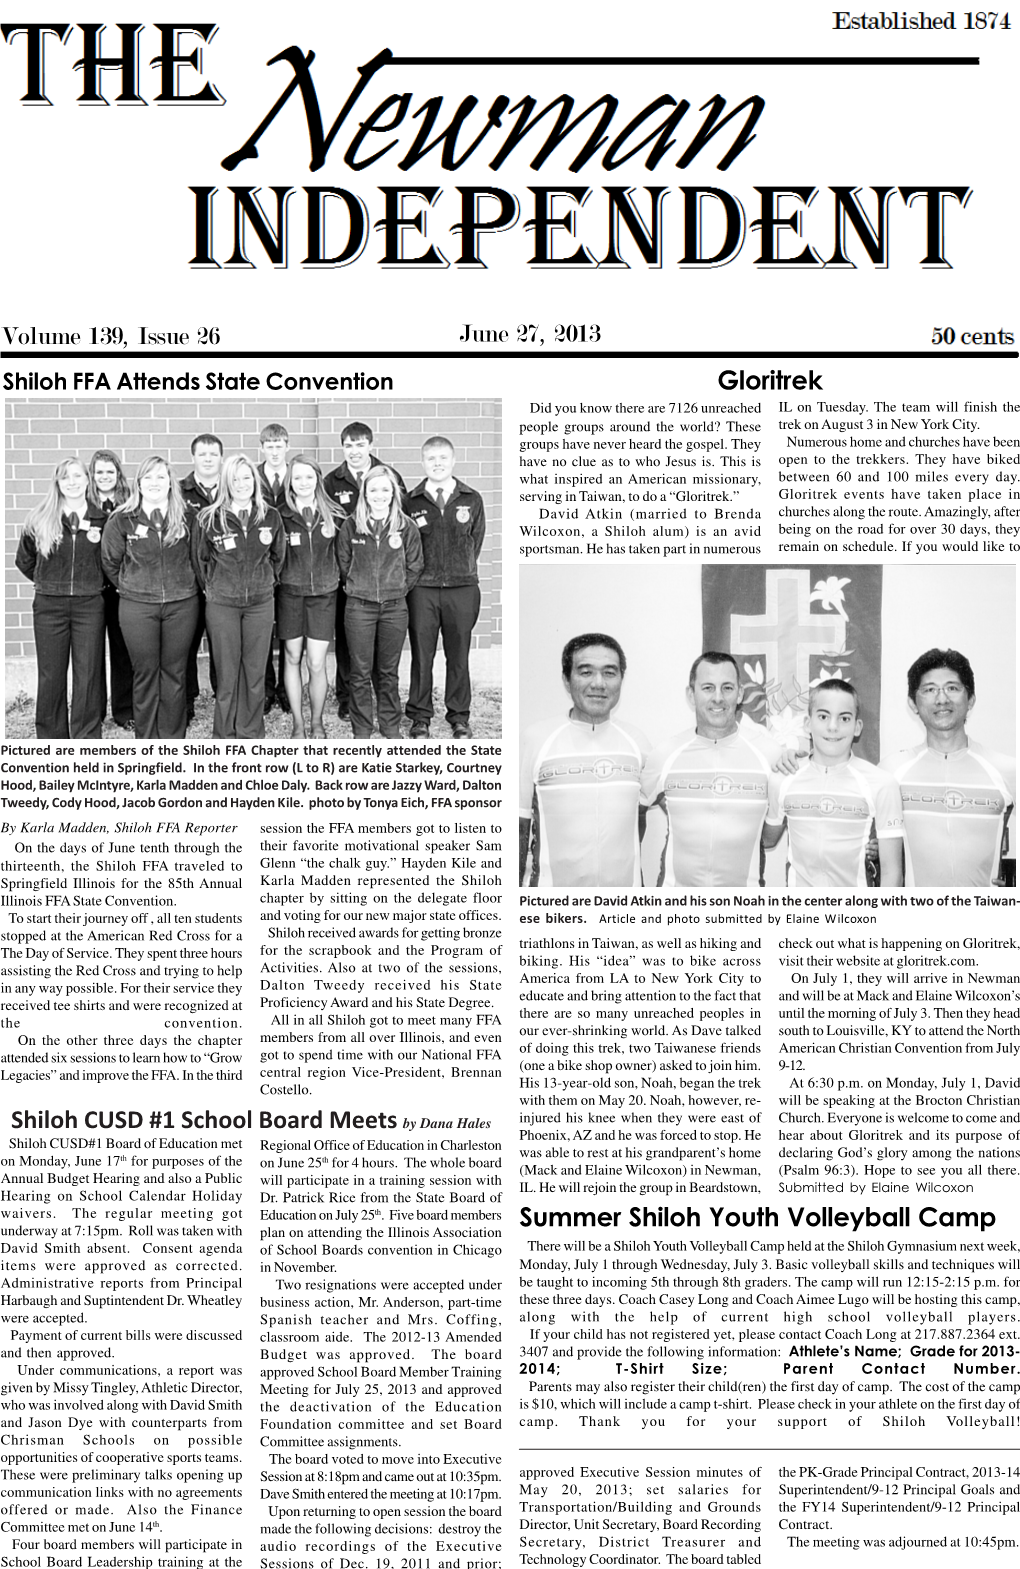 June 27, 2013 Volume 139, Issue 26 Summer Shiloh Youth Volleyball Camp Gloritrek Shiloh CUSD #1 School Board Meets by Dana Hales